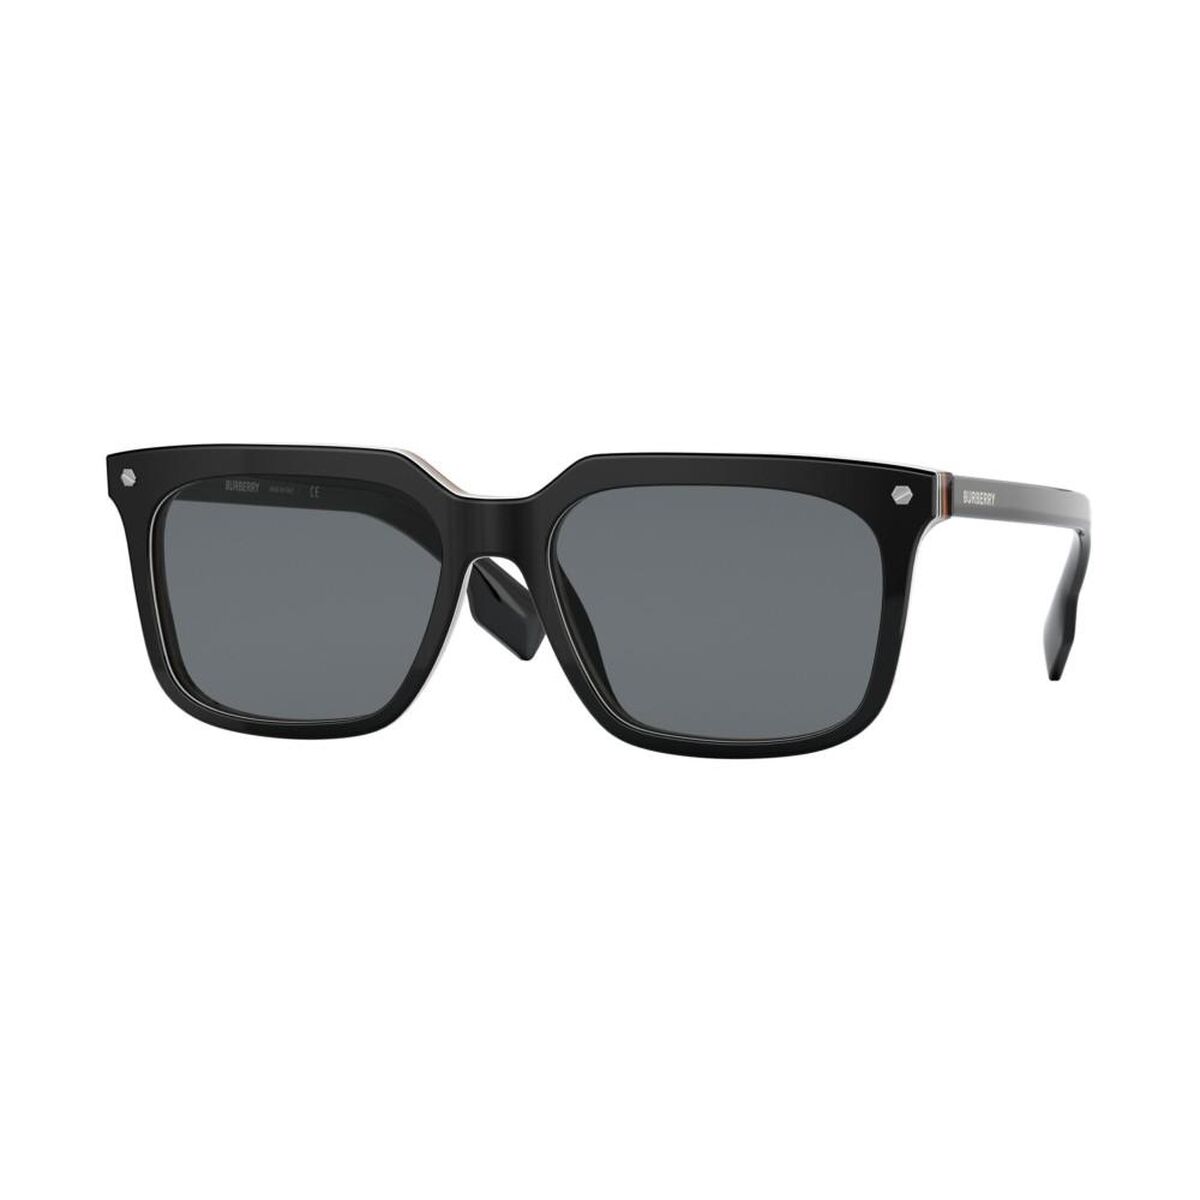 Lunettes de soleil Homme Burberry CARNABY BE 4337